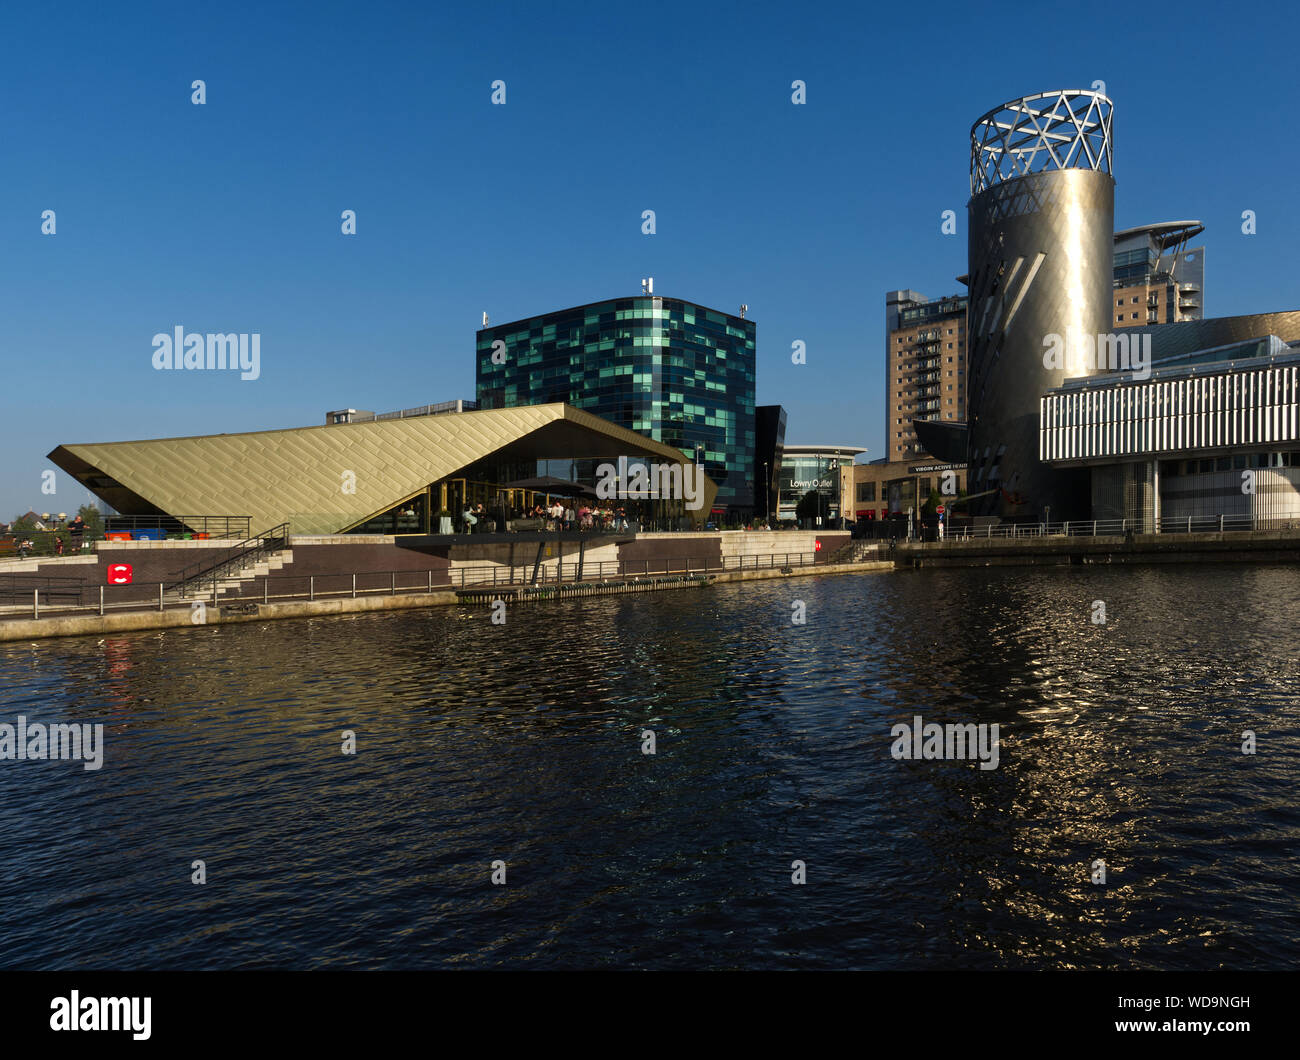 Media City, Salford, Manchester, twilight images across Manchester ship canal Stock Photo